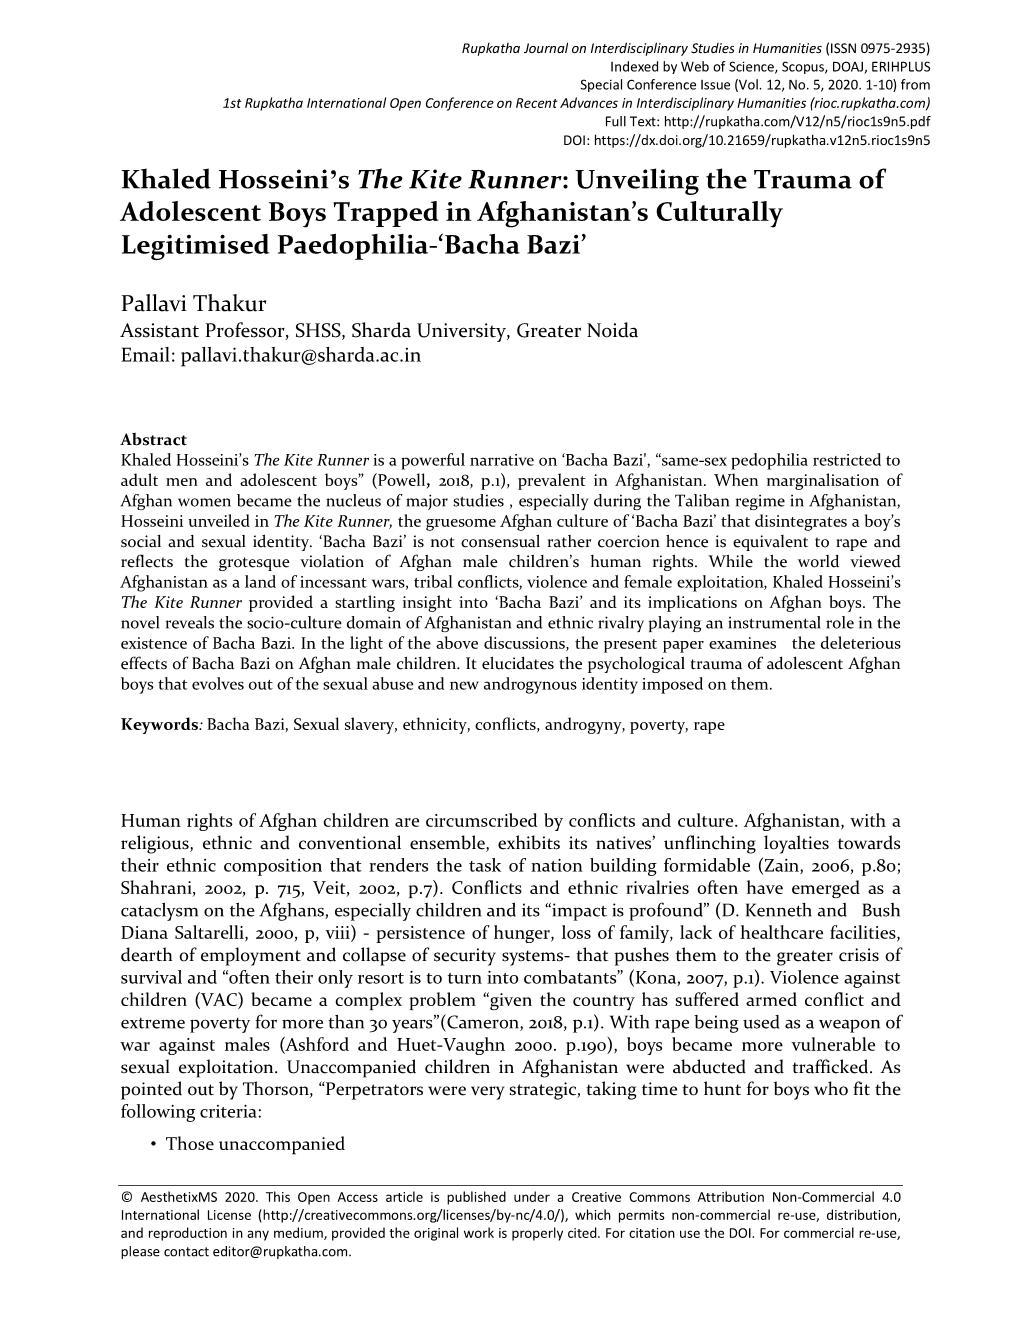 Khaled Hosseini's the Kite Runner: Unveiling the Trauma of Adolescent Boys Trapped in Afghanistan's Culturally Legitimised P